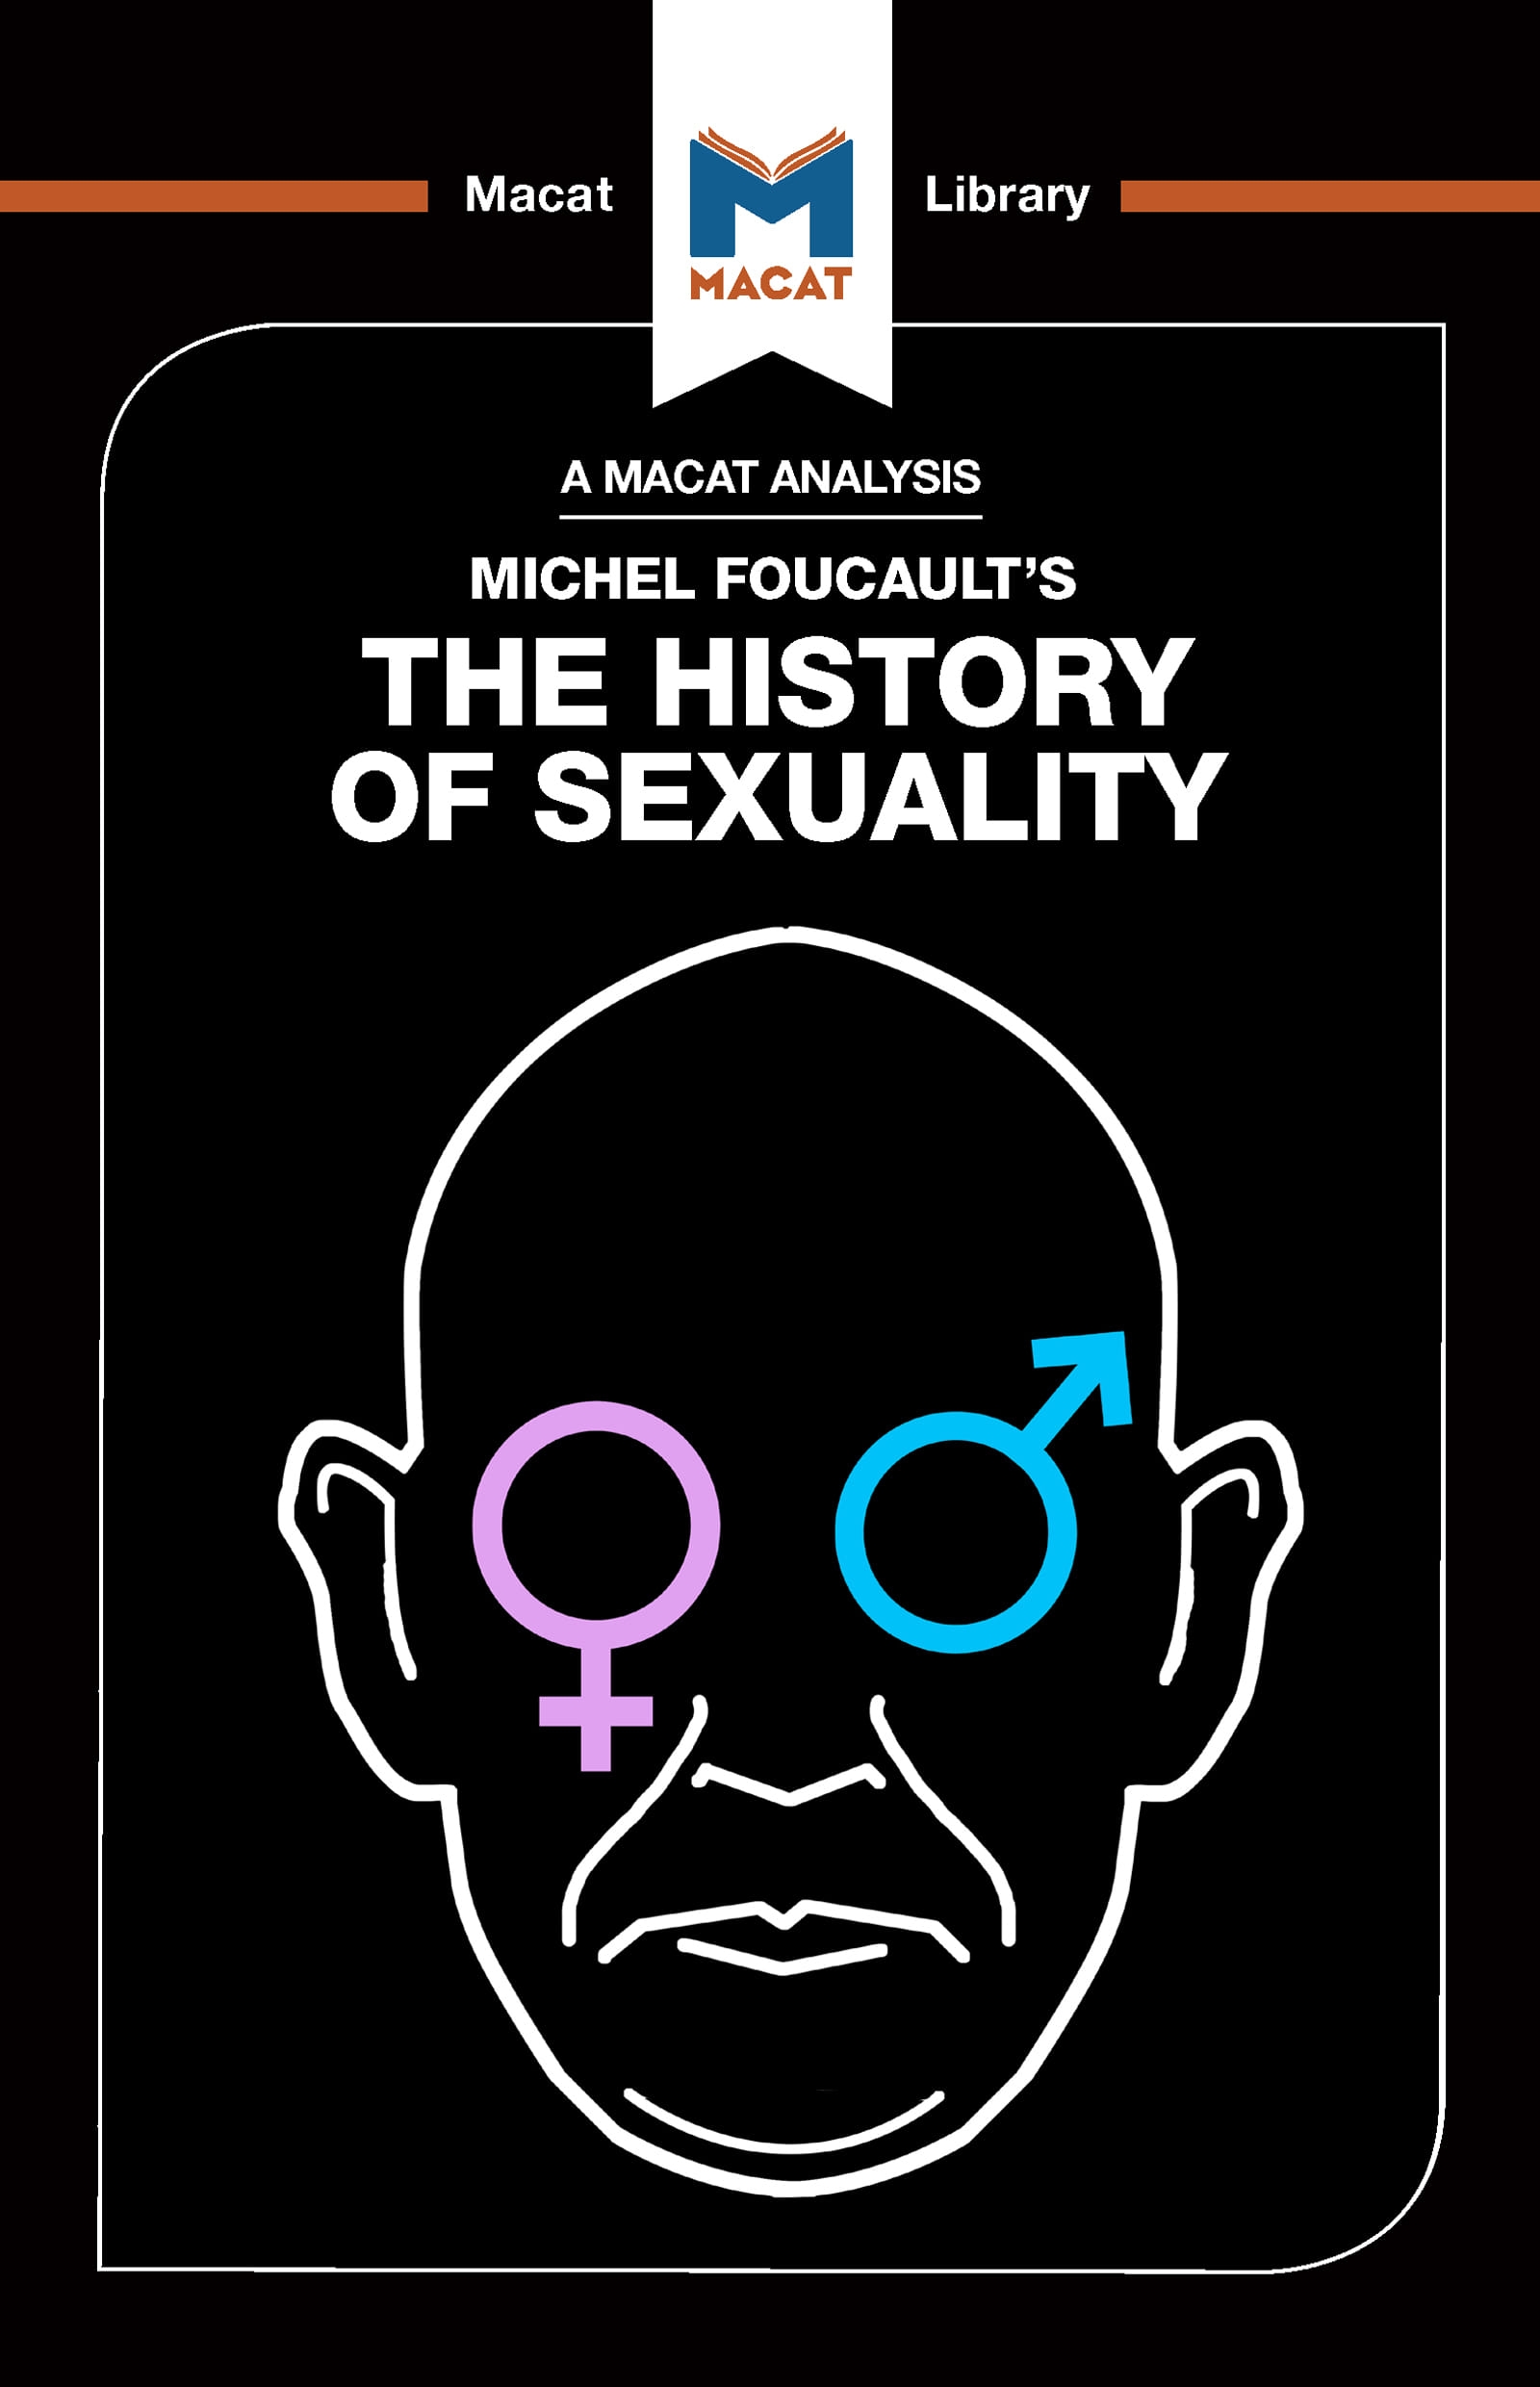 A Macat Analysis Michel Foucault’s History of Sexuality